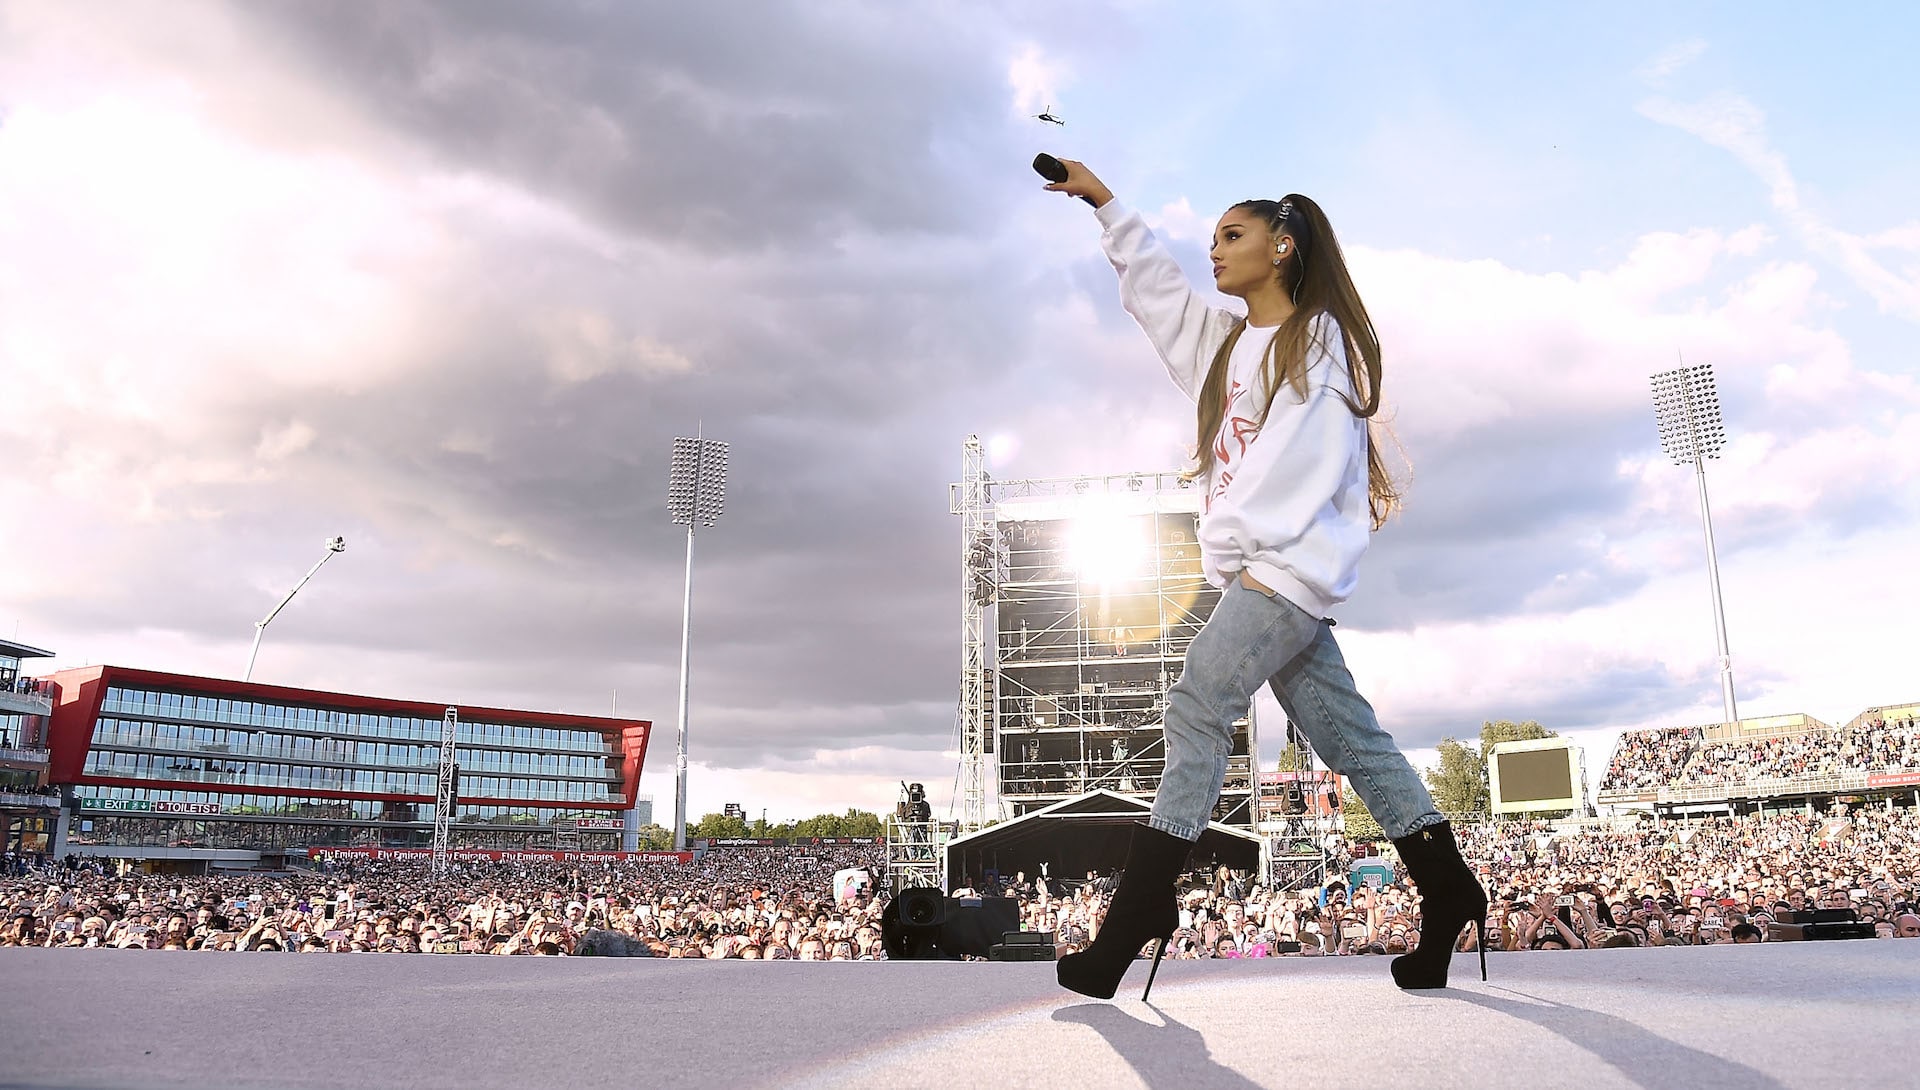 Ariana Grande becomes British heroine with Manchester concert